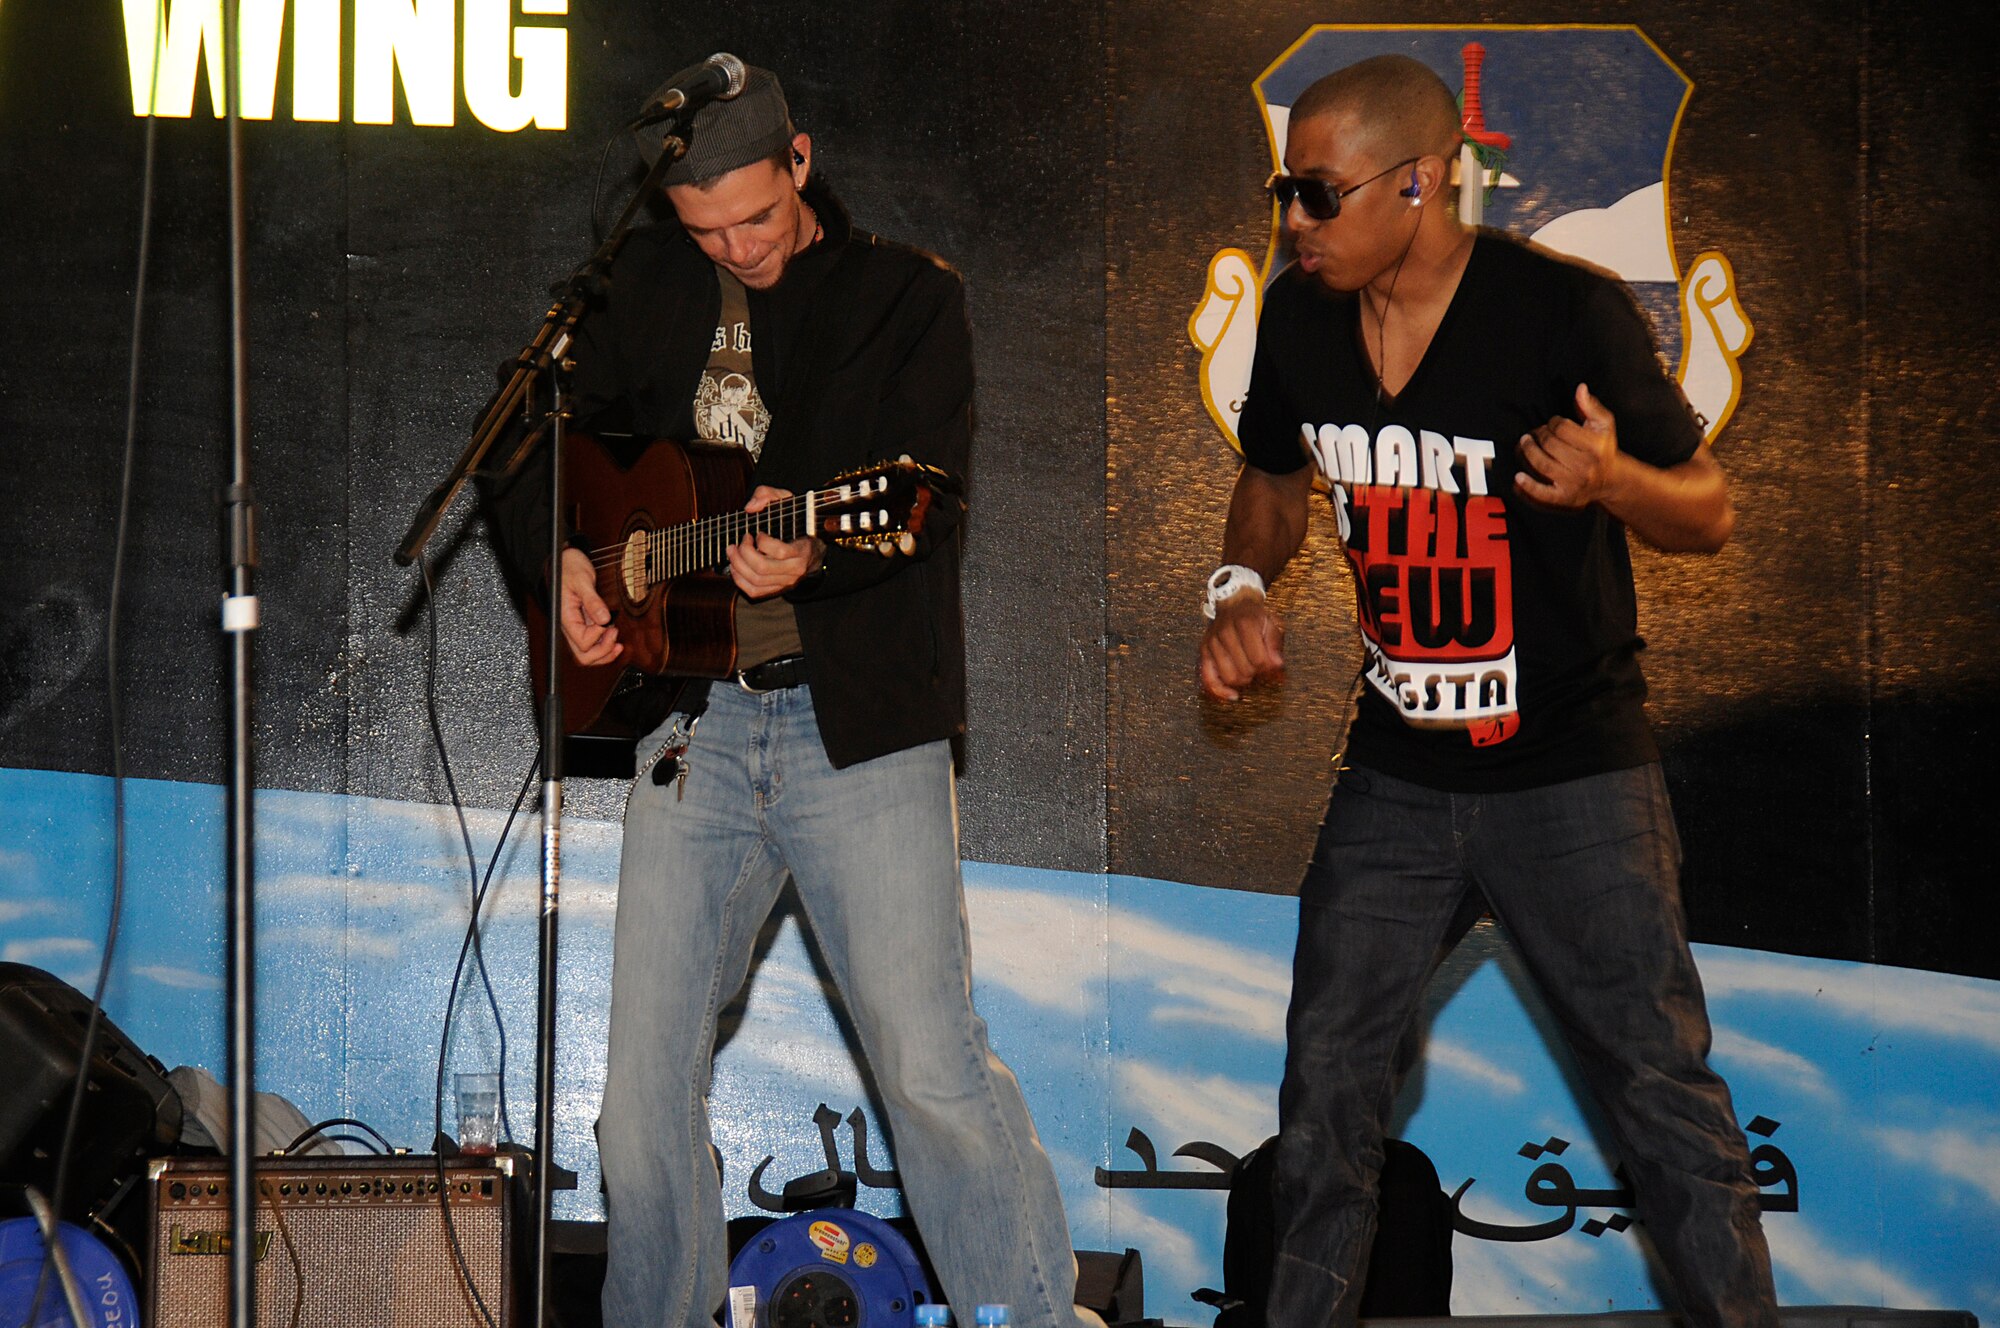 SOUTHWEST ASIA - Los Bad Apple member Zeale, emcee rocks out with Greg "Doctor" Jones during their performance for Airmen at the 380th Air Expeditionary Wing, Feb 10. Los Bad Apples are a latin inspired hip-hop band on their second stop of an Armed Forces Entertainment tour. (U.S. Air Force photo by Senior Airman Brian J. Ellis) (Released)